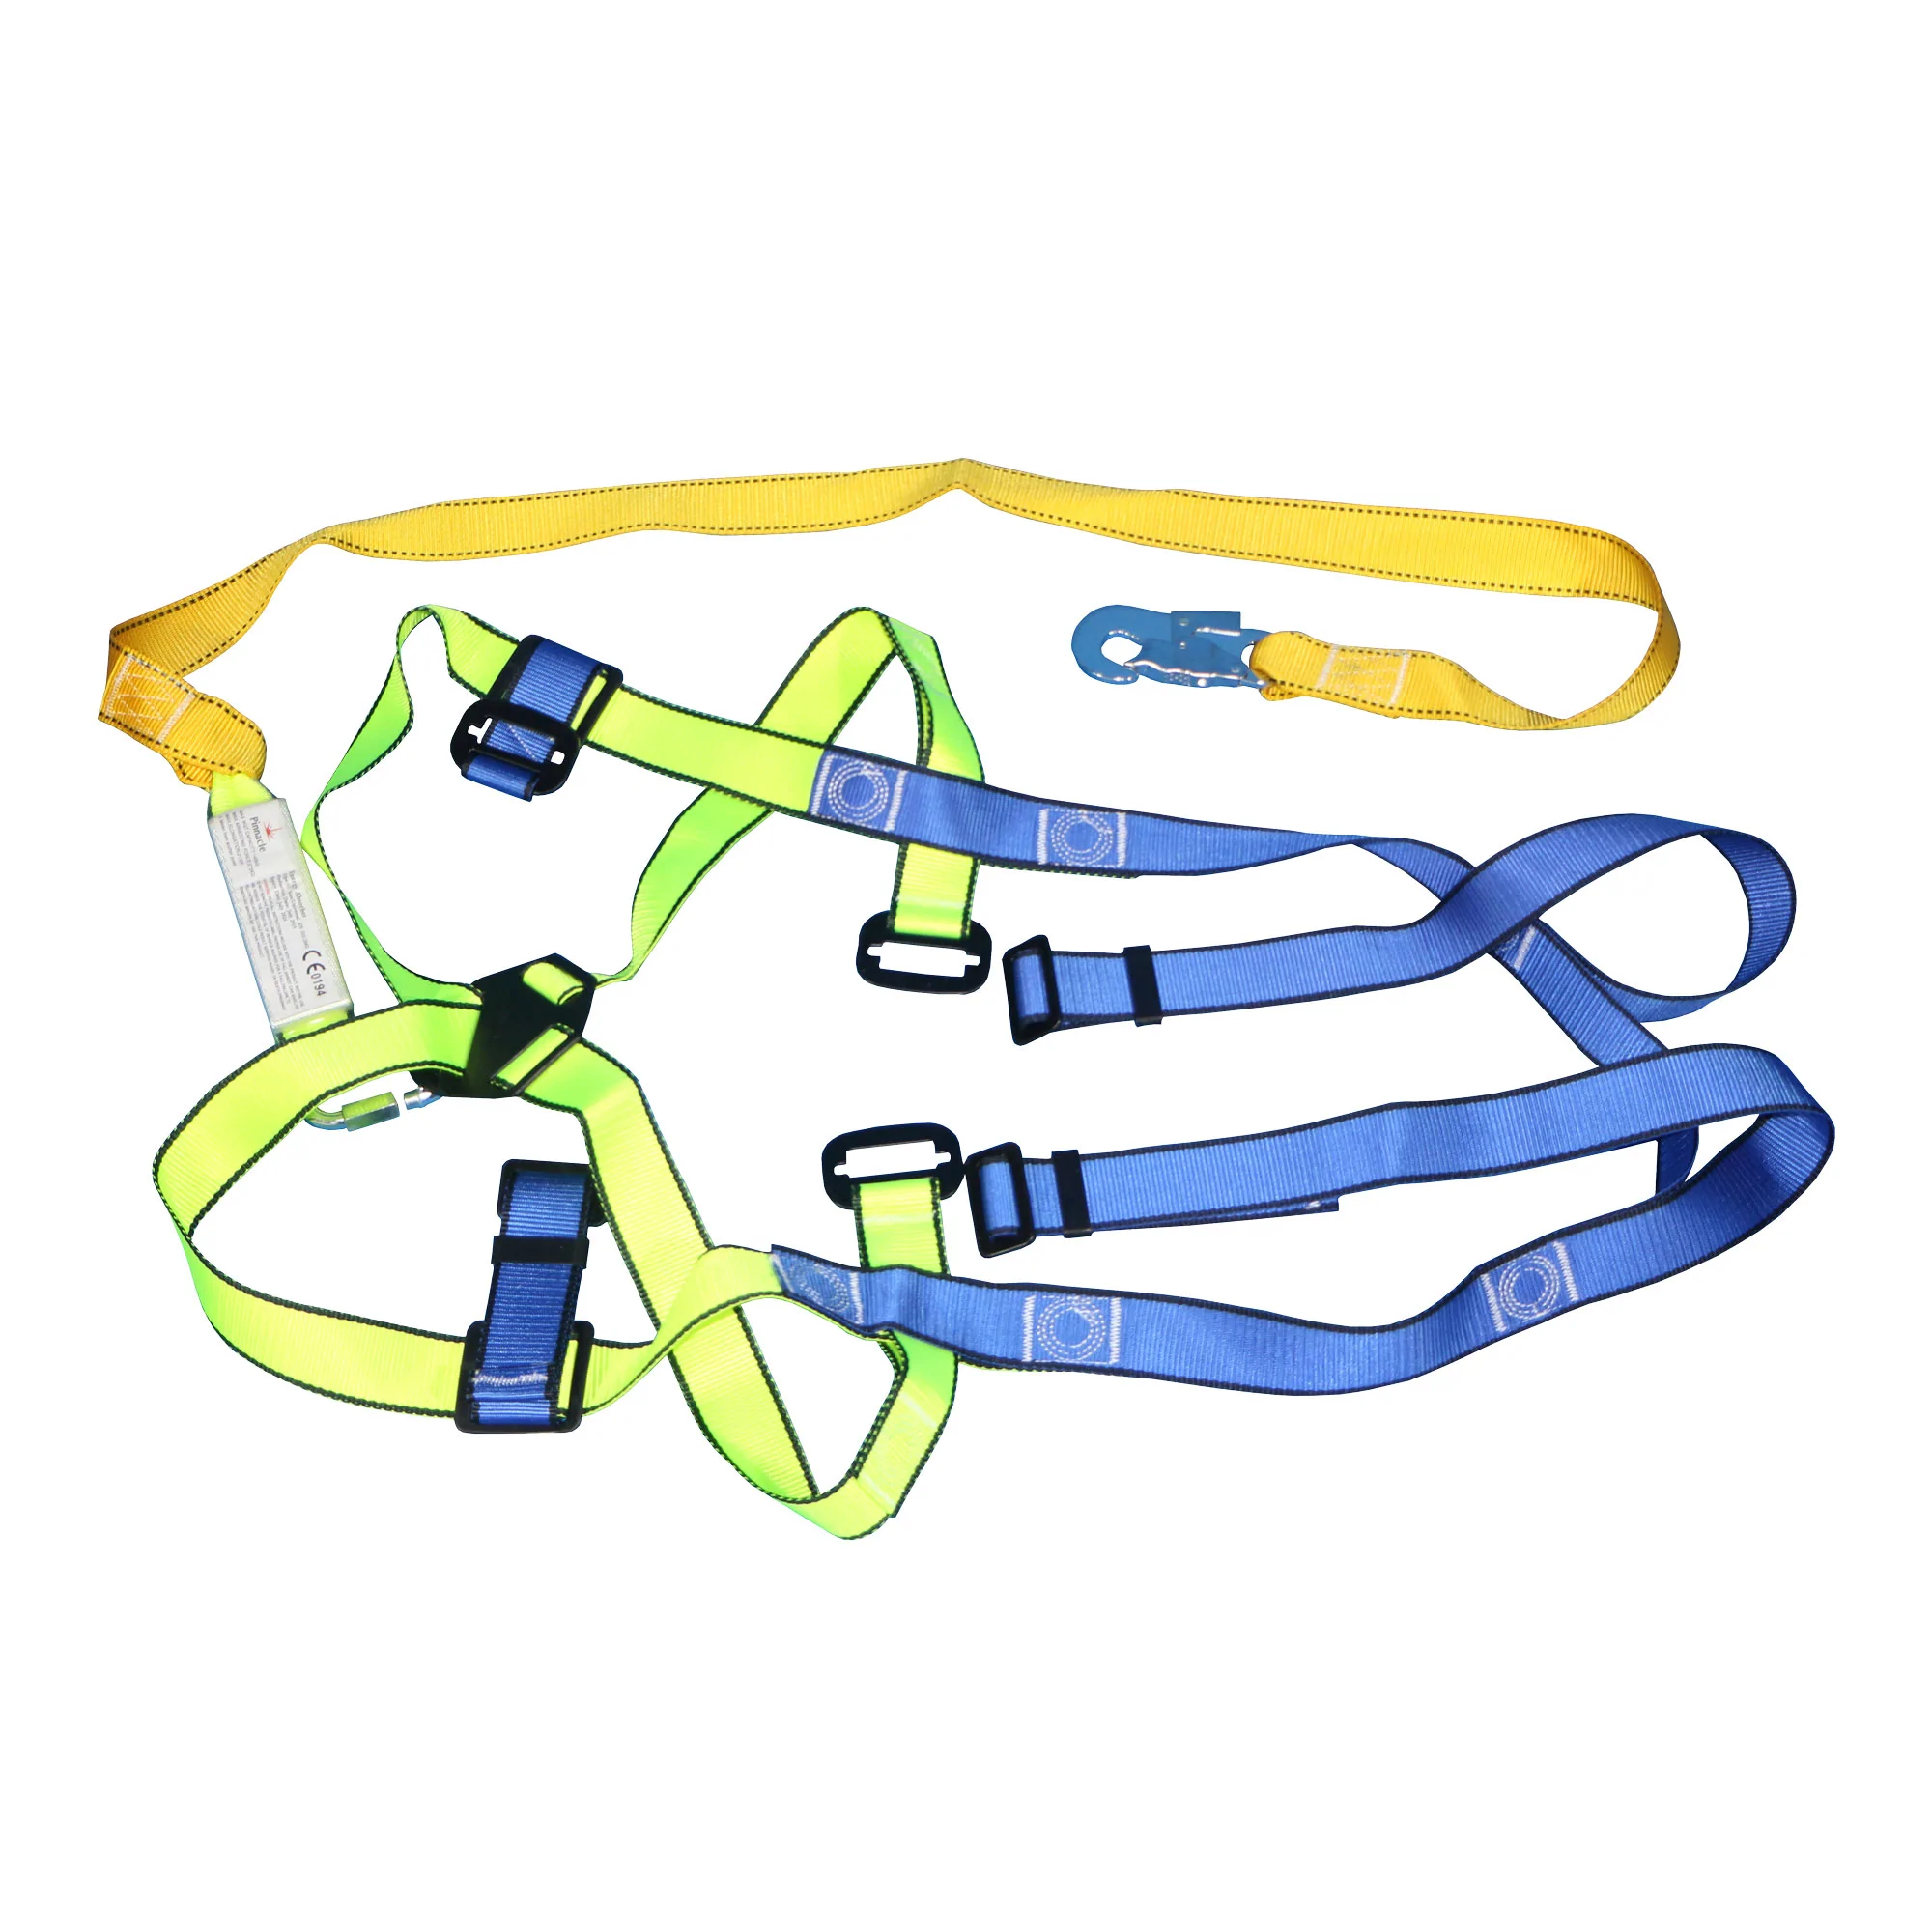 Single lanyard full body harness with snap hook